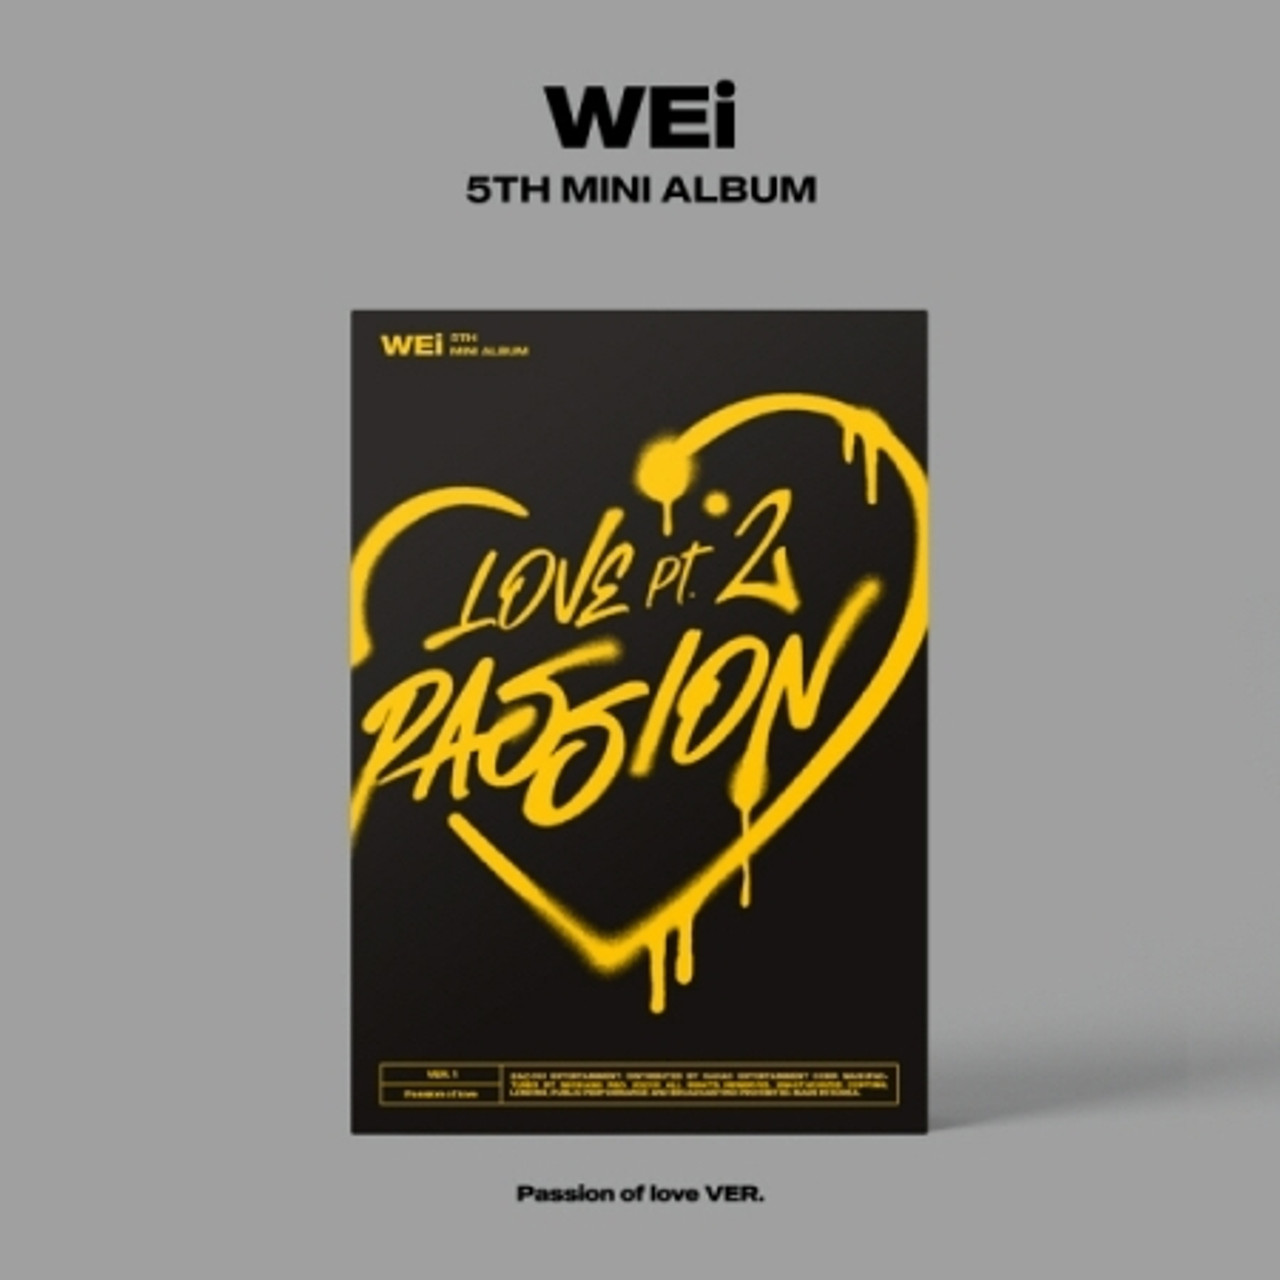 WEi   Love Pt2   Passion   Passion of love VER 